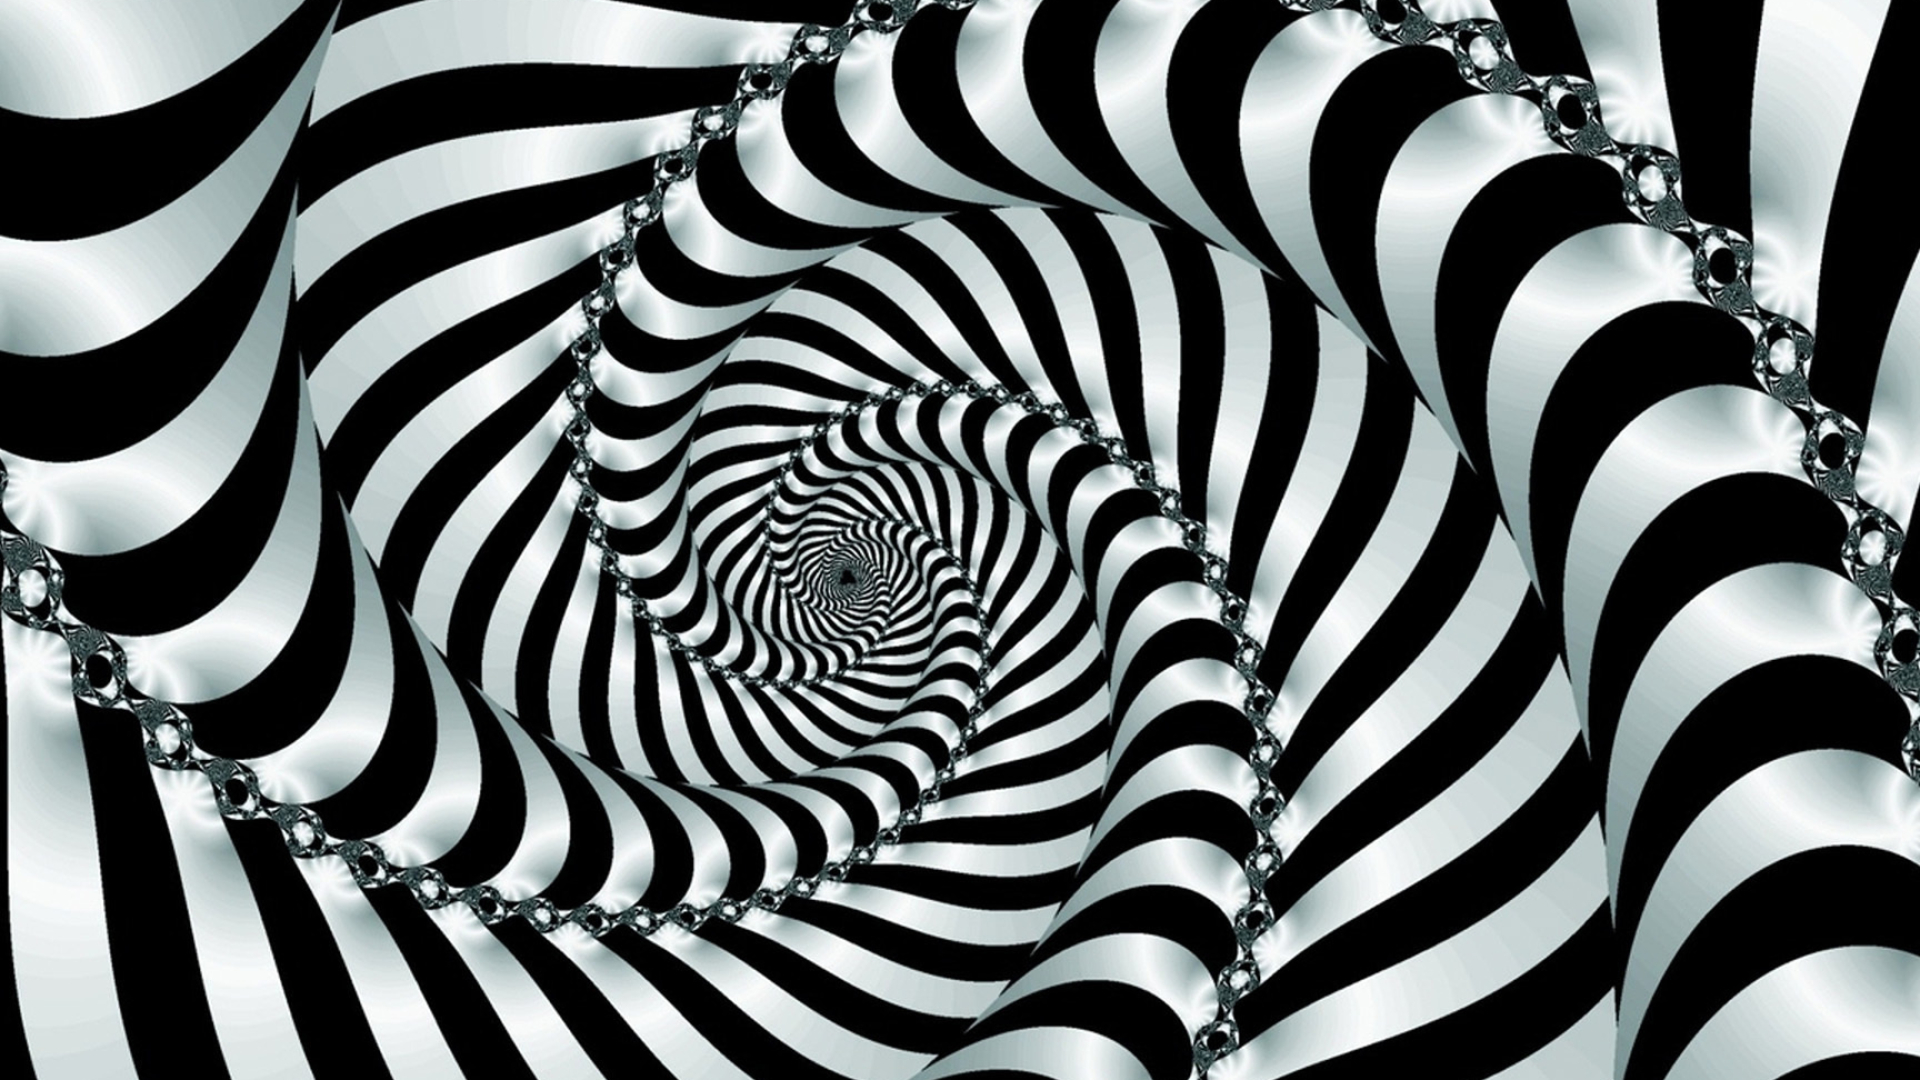 Hypnotic, Black and white hypnotic swirl, Abstract fascination, Enigmatic allure, 1920x1080 Full HD Desktop